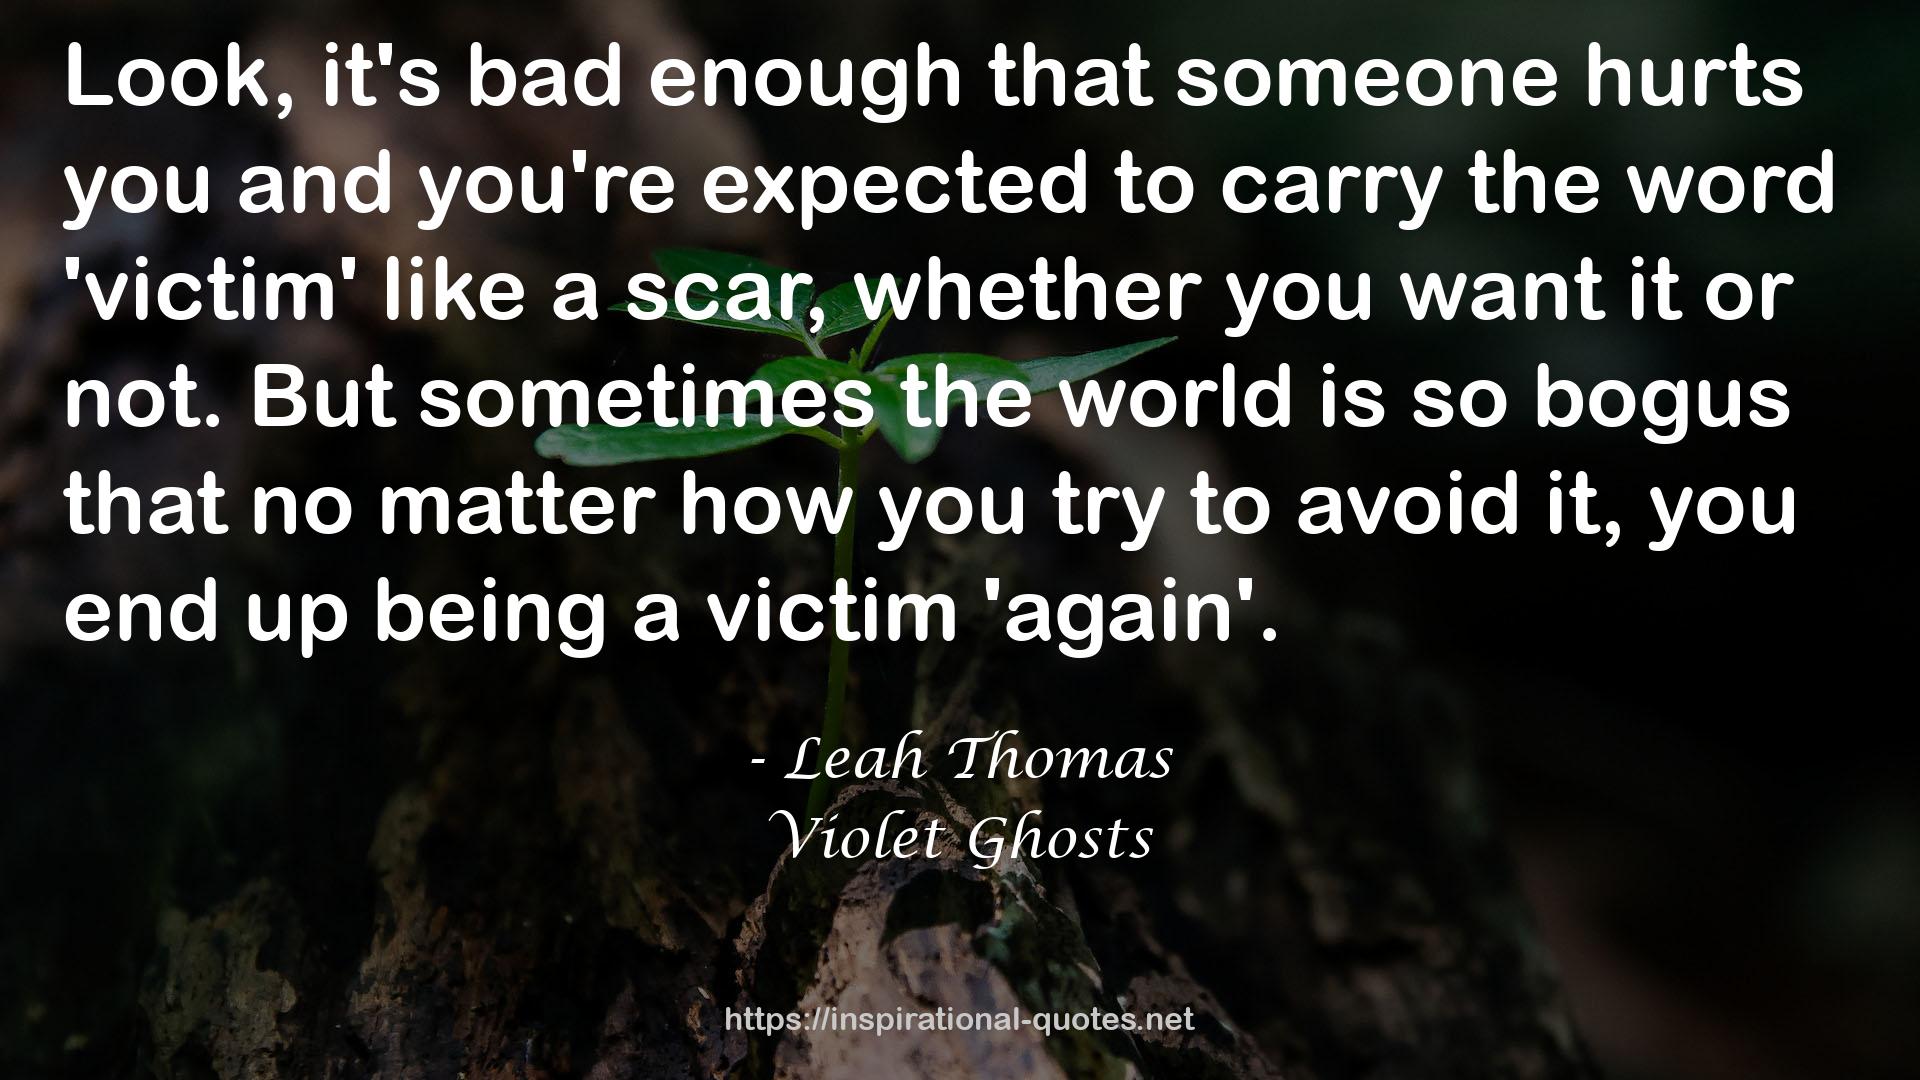 Violet Ghosts QUOTES